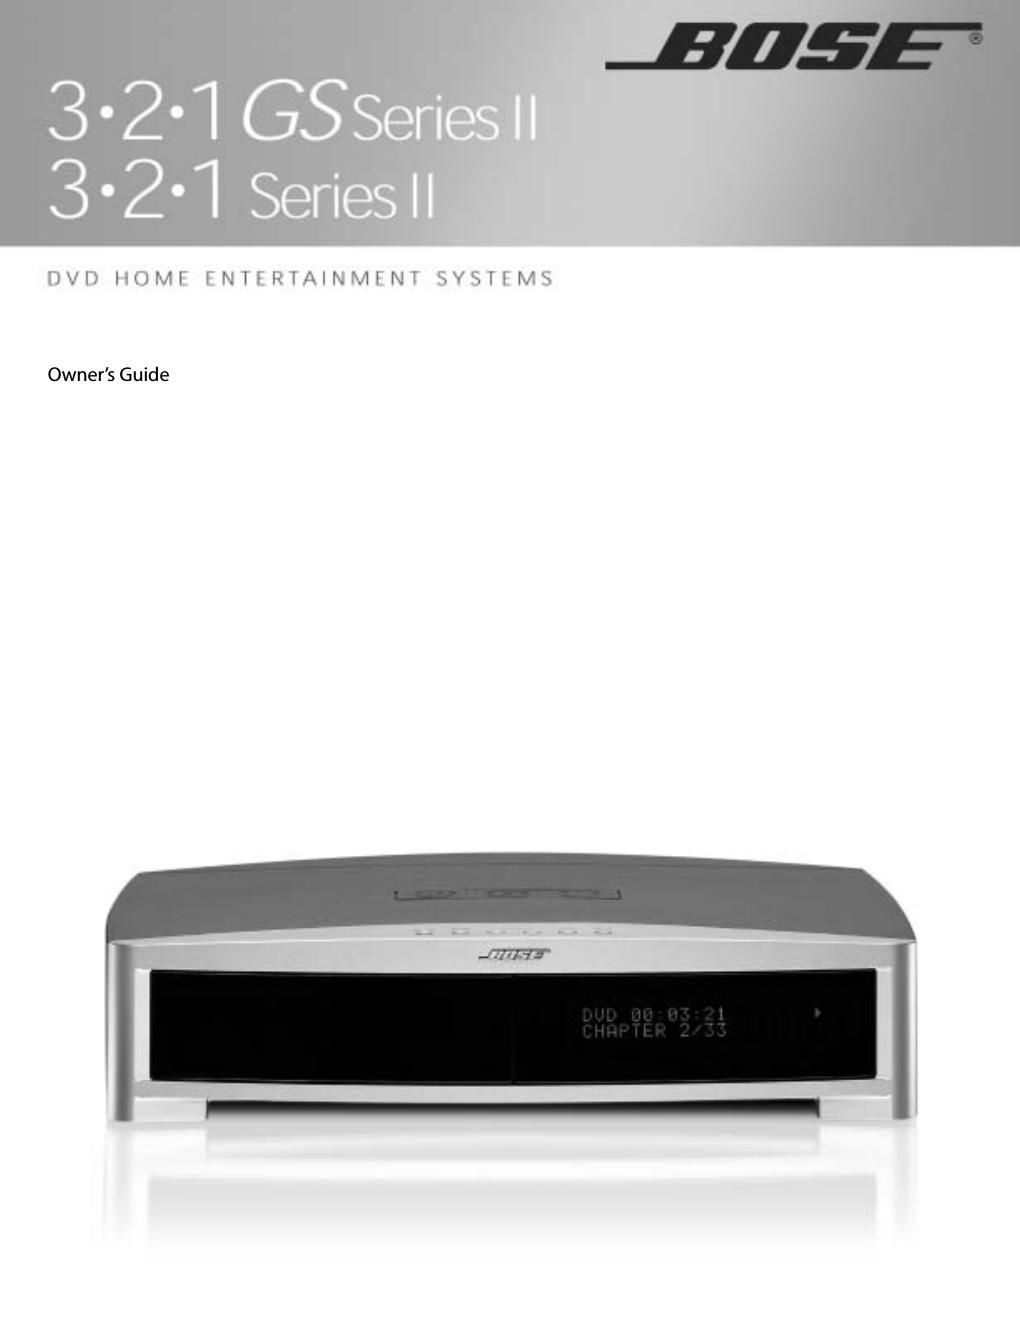 bose 321 gs series ii owners guide